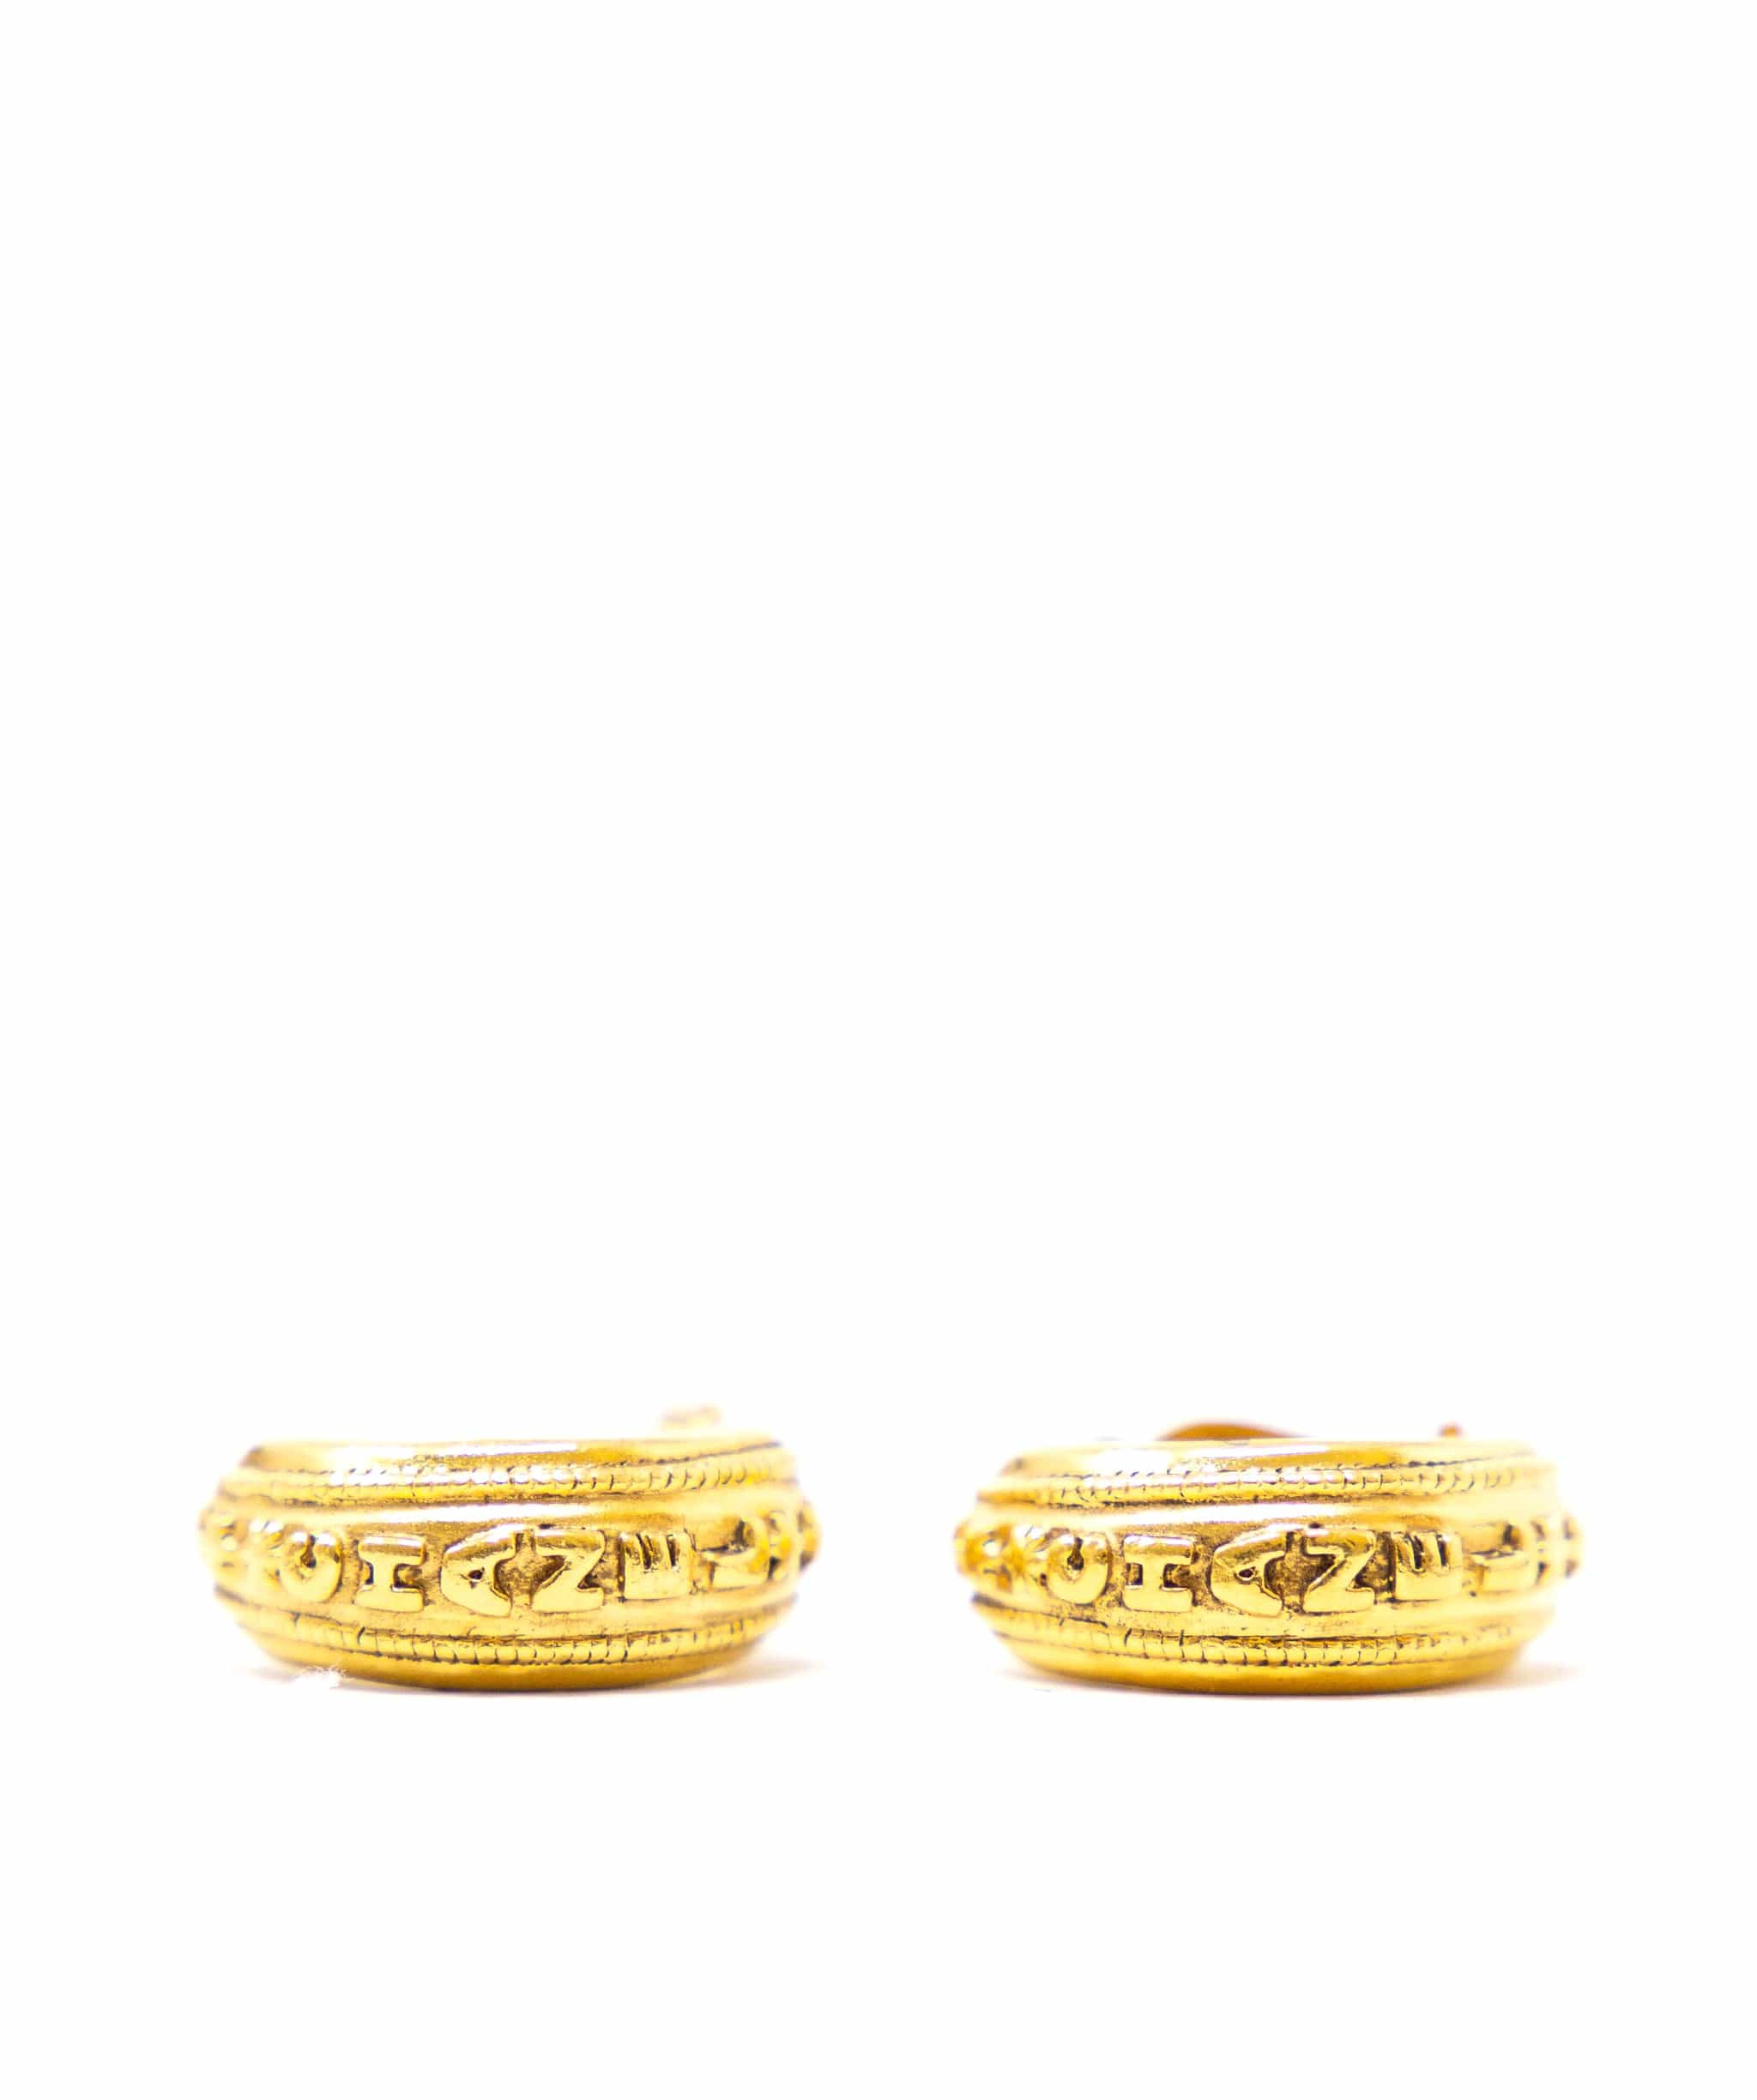 Chanel Chanel Spell out 24kt gold gilded earrings - ADL1838